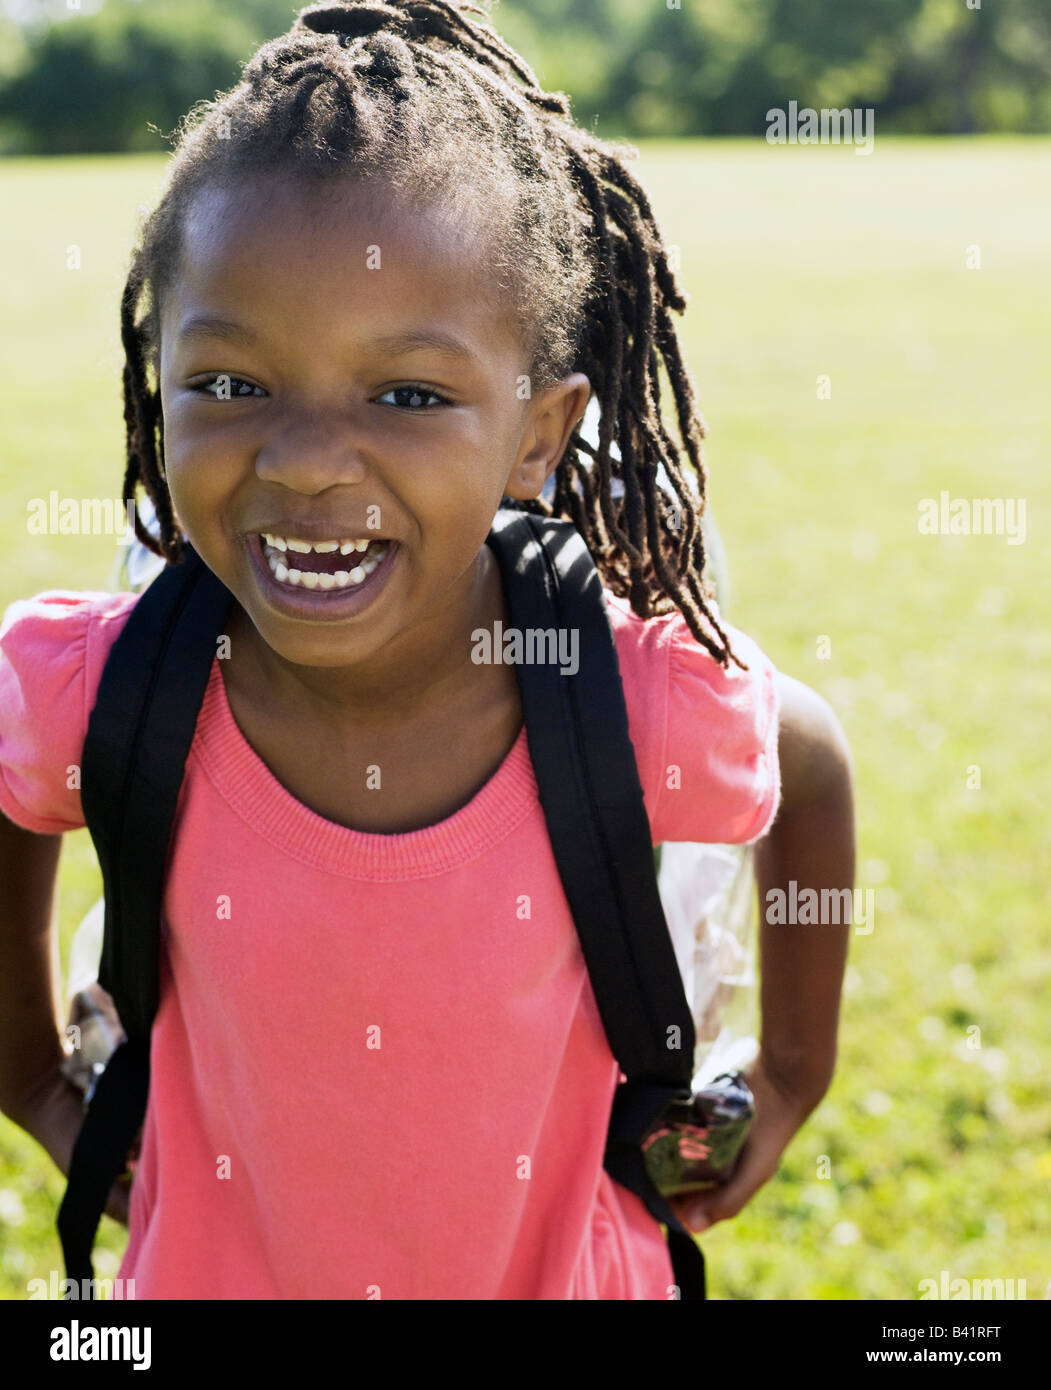 Young African American girl wearing backpack smiling at camera Stock Photo